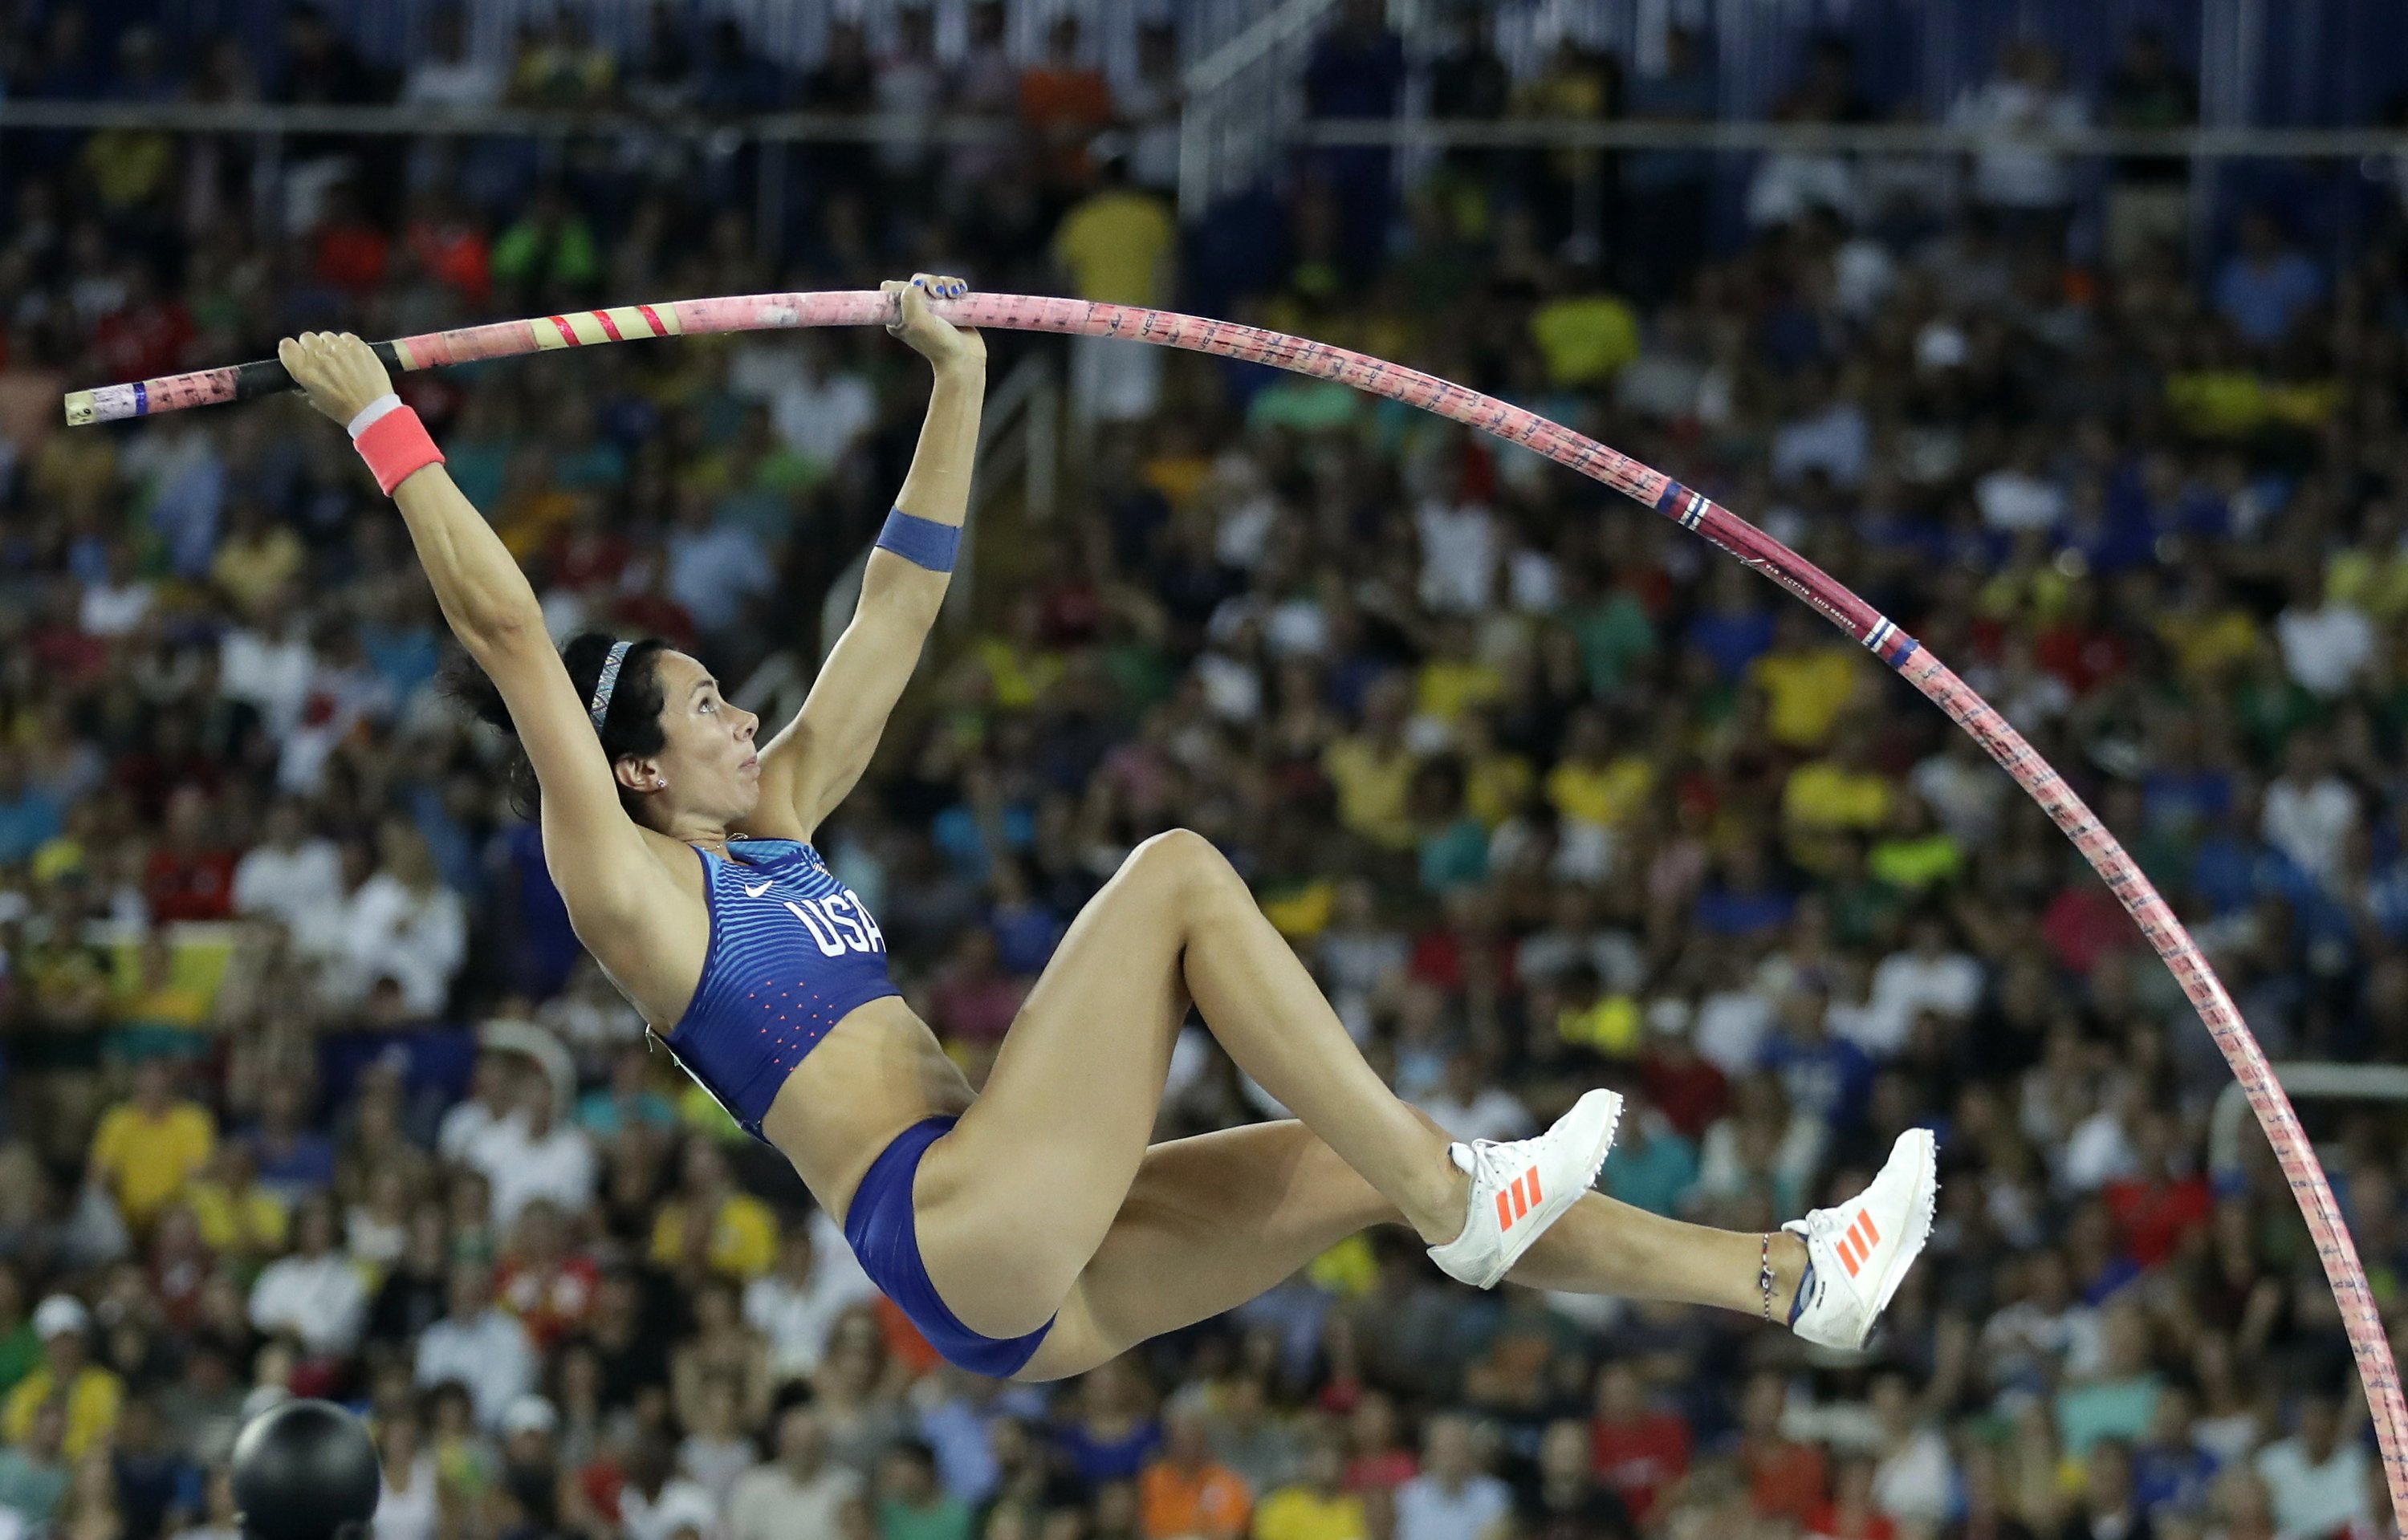 A sick Jenn Suhr can't defend title in Olympic pole vault.